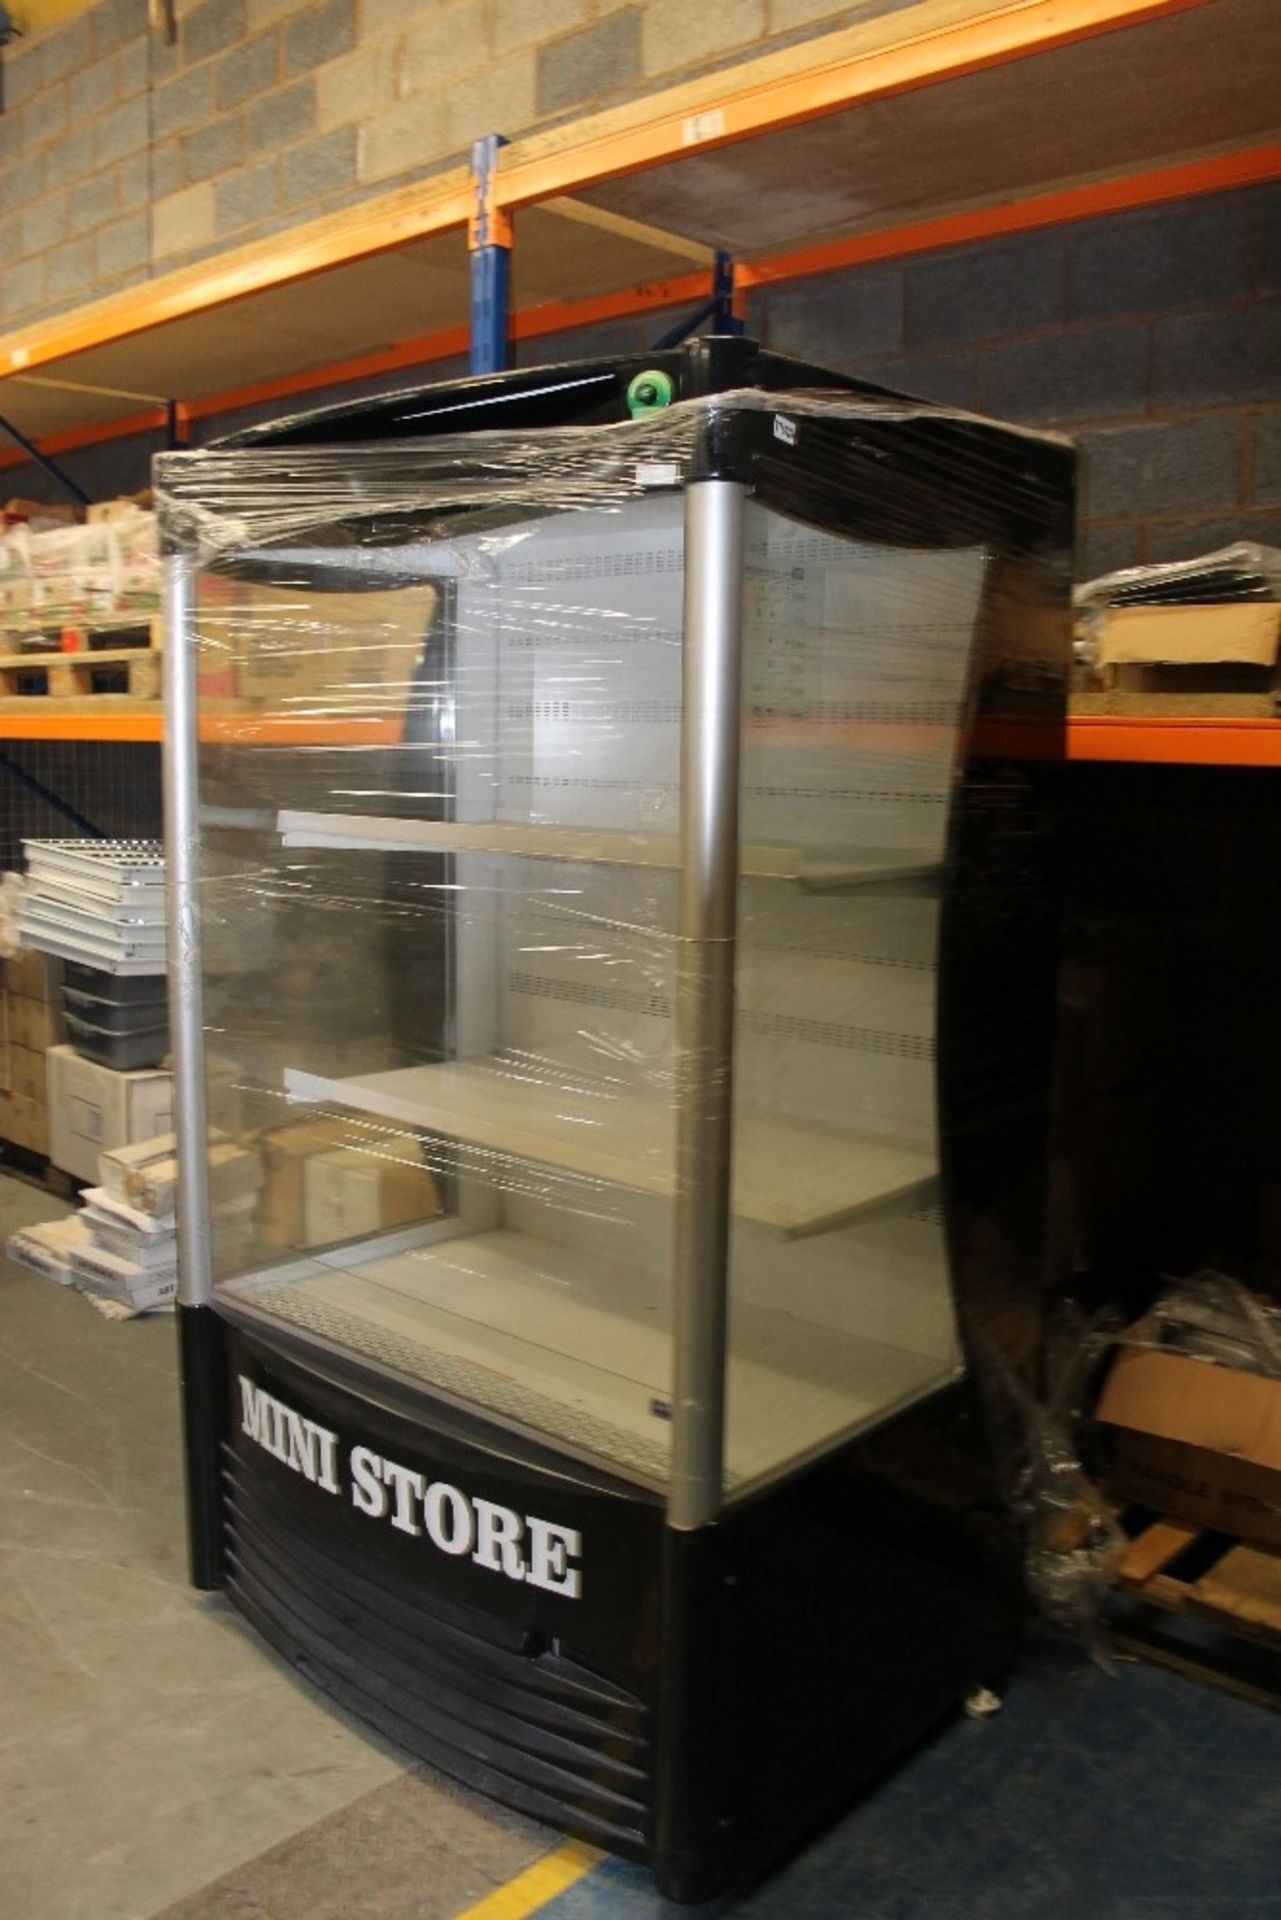 Shop Display Fridge – W118cm x H200cm x D86cm NO VAT - Image 2 of 2